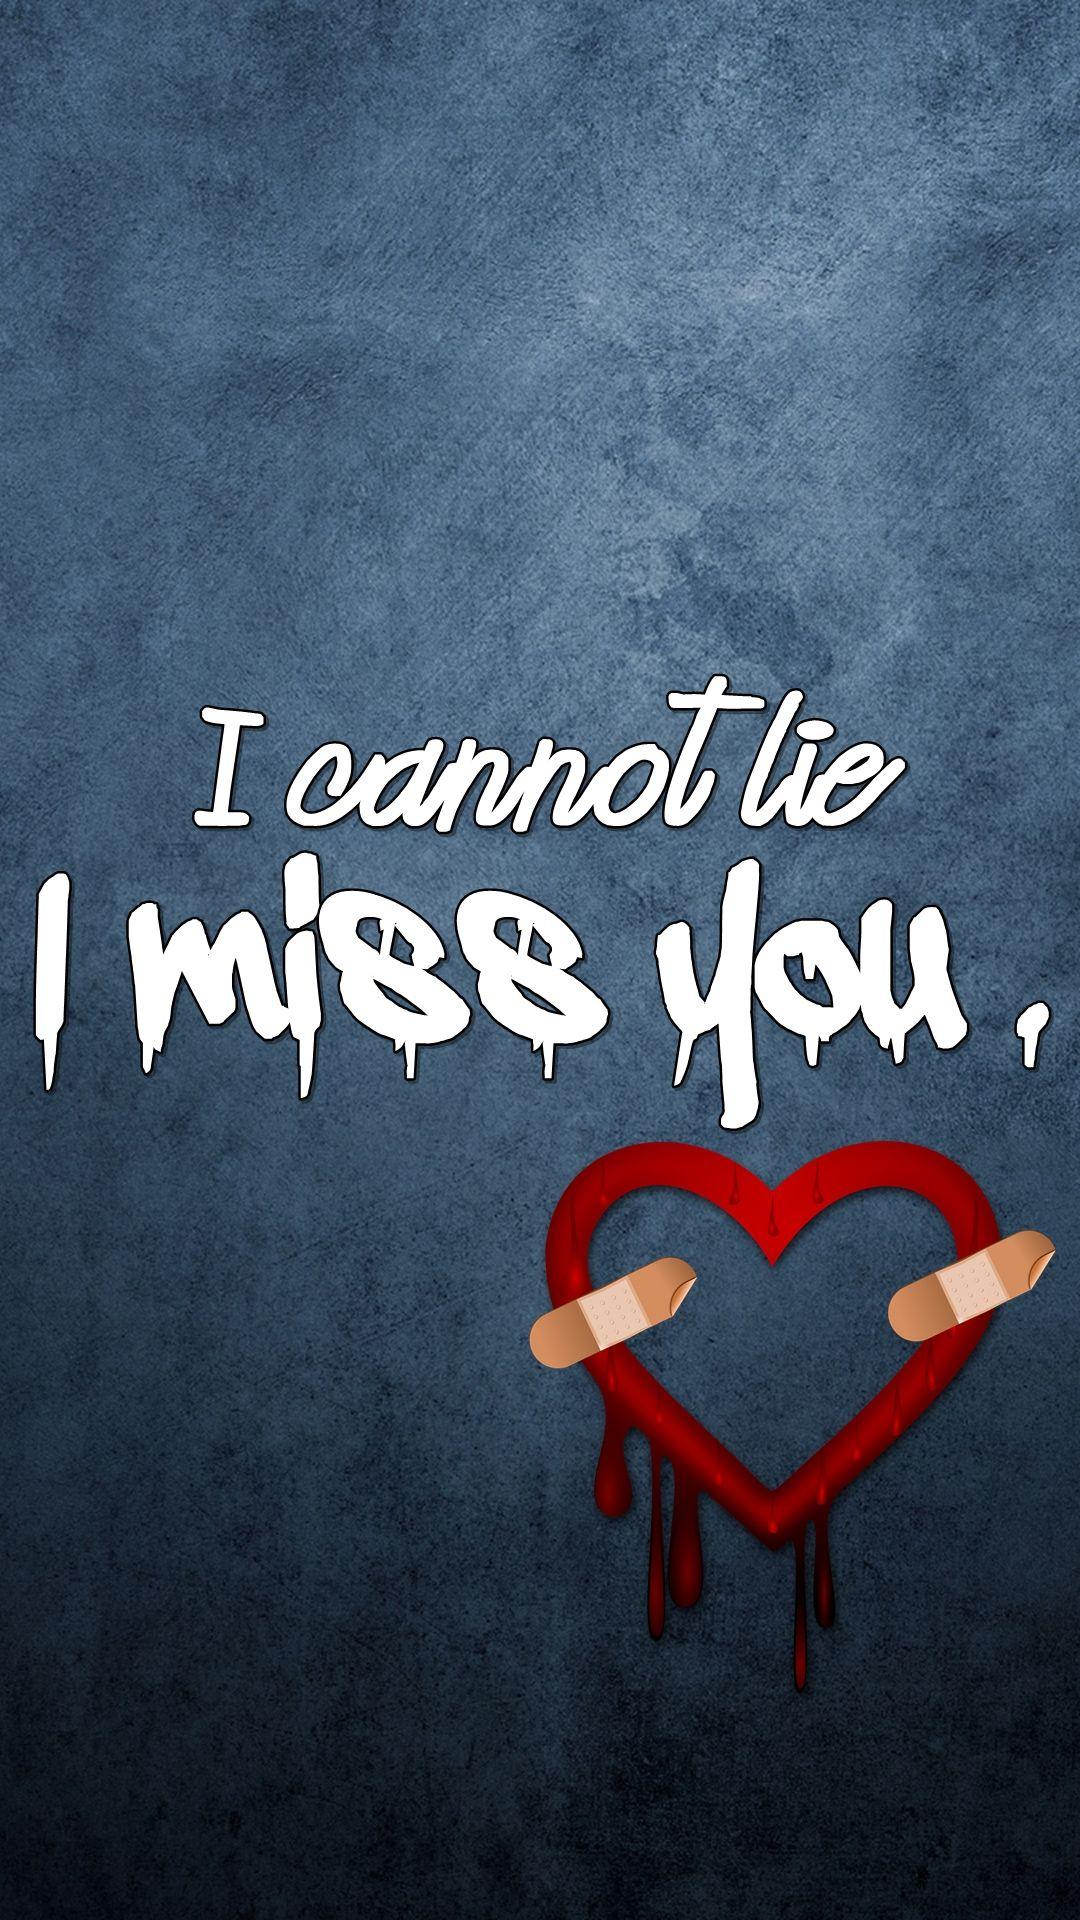 I cannot Lie, I Miss You. Samsung Galaxy S5 Wallpaper